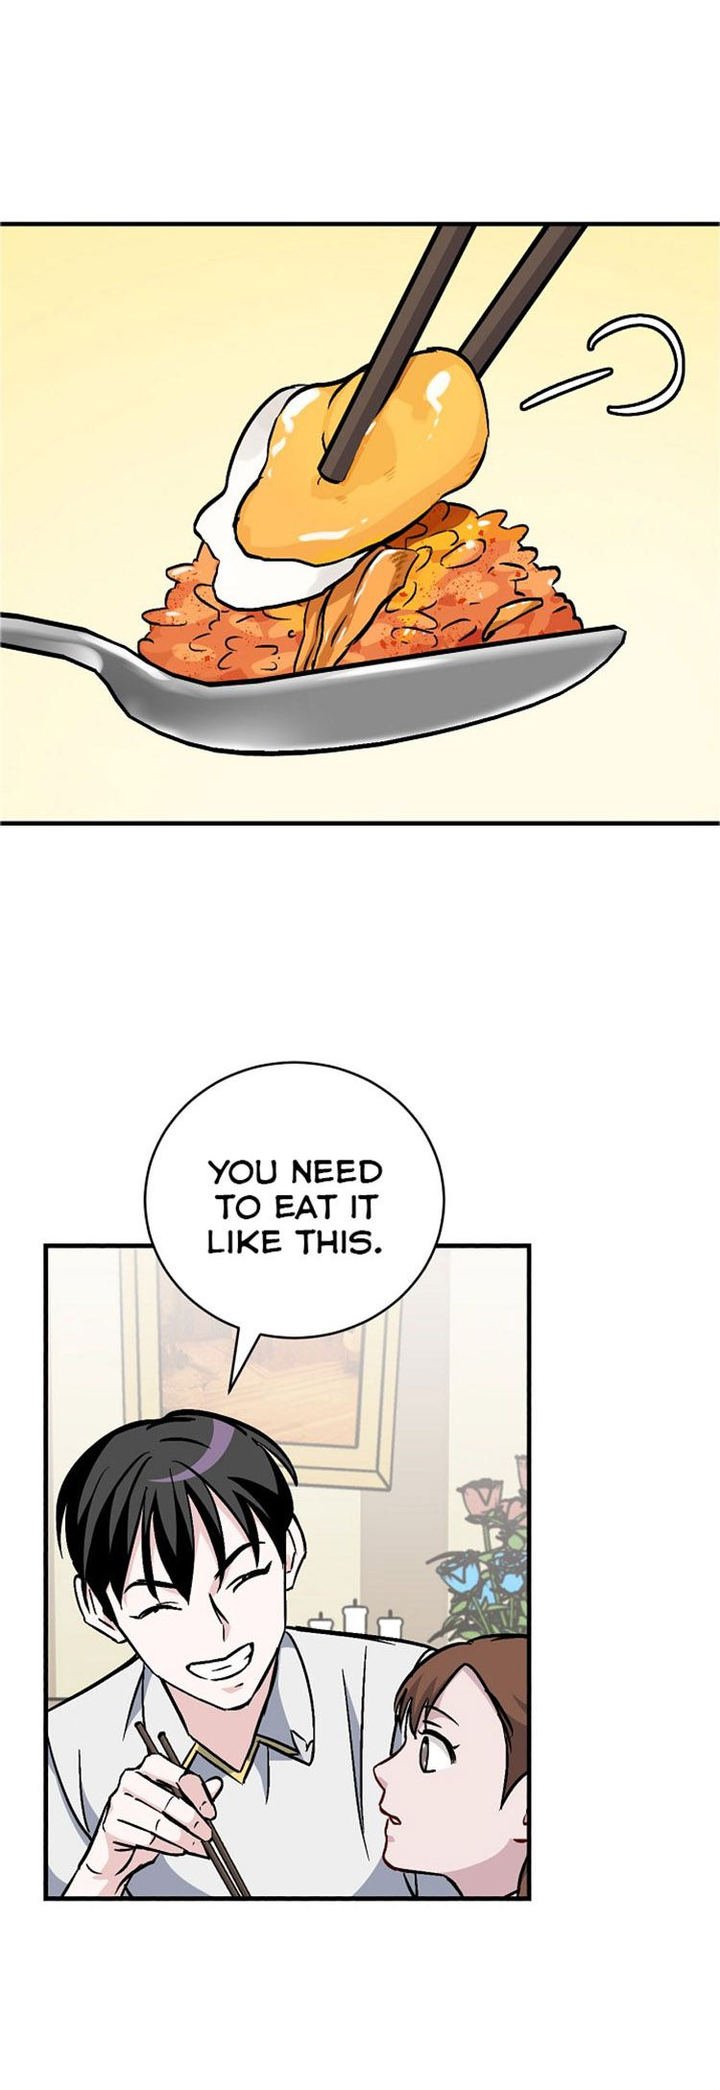 leveling-up-by-only-eating-chap-34-34